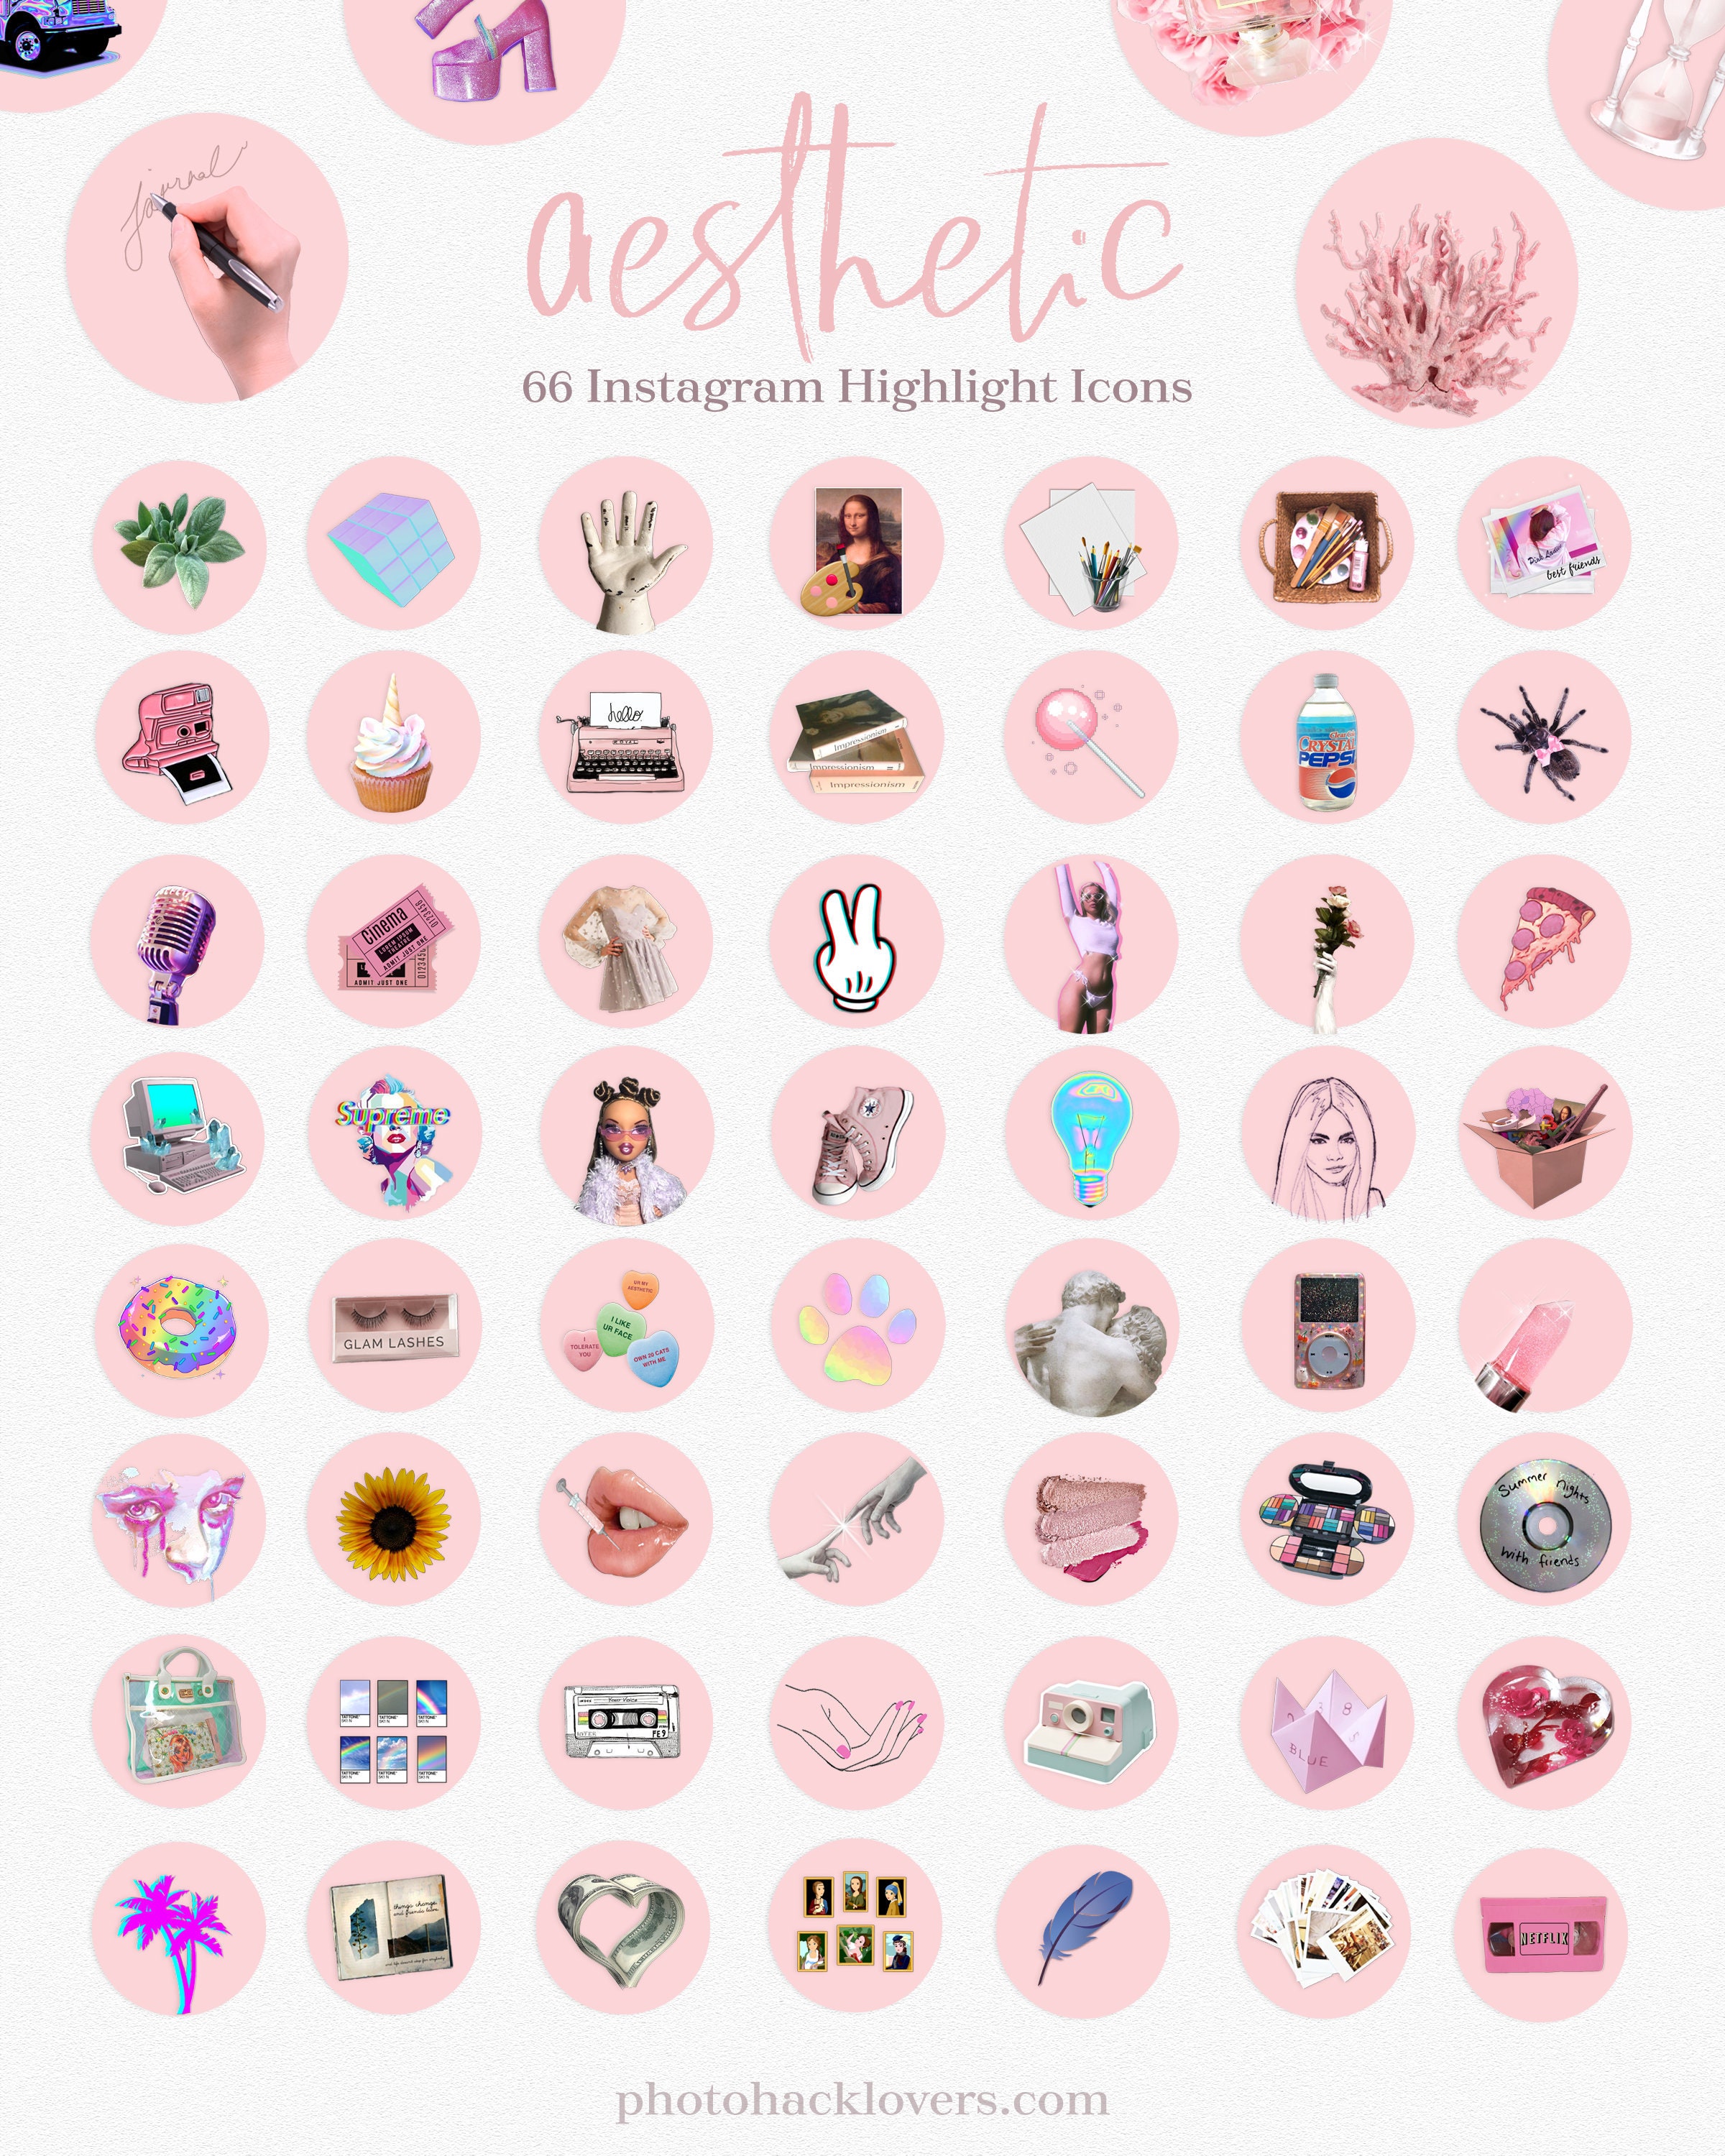 Kelly Hill - Free Instagram Highlights Template - Wanderlust Pink 02 Icons